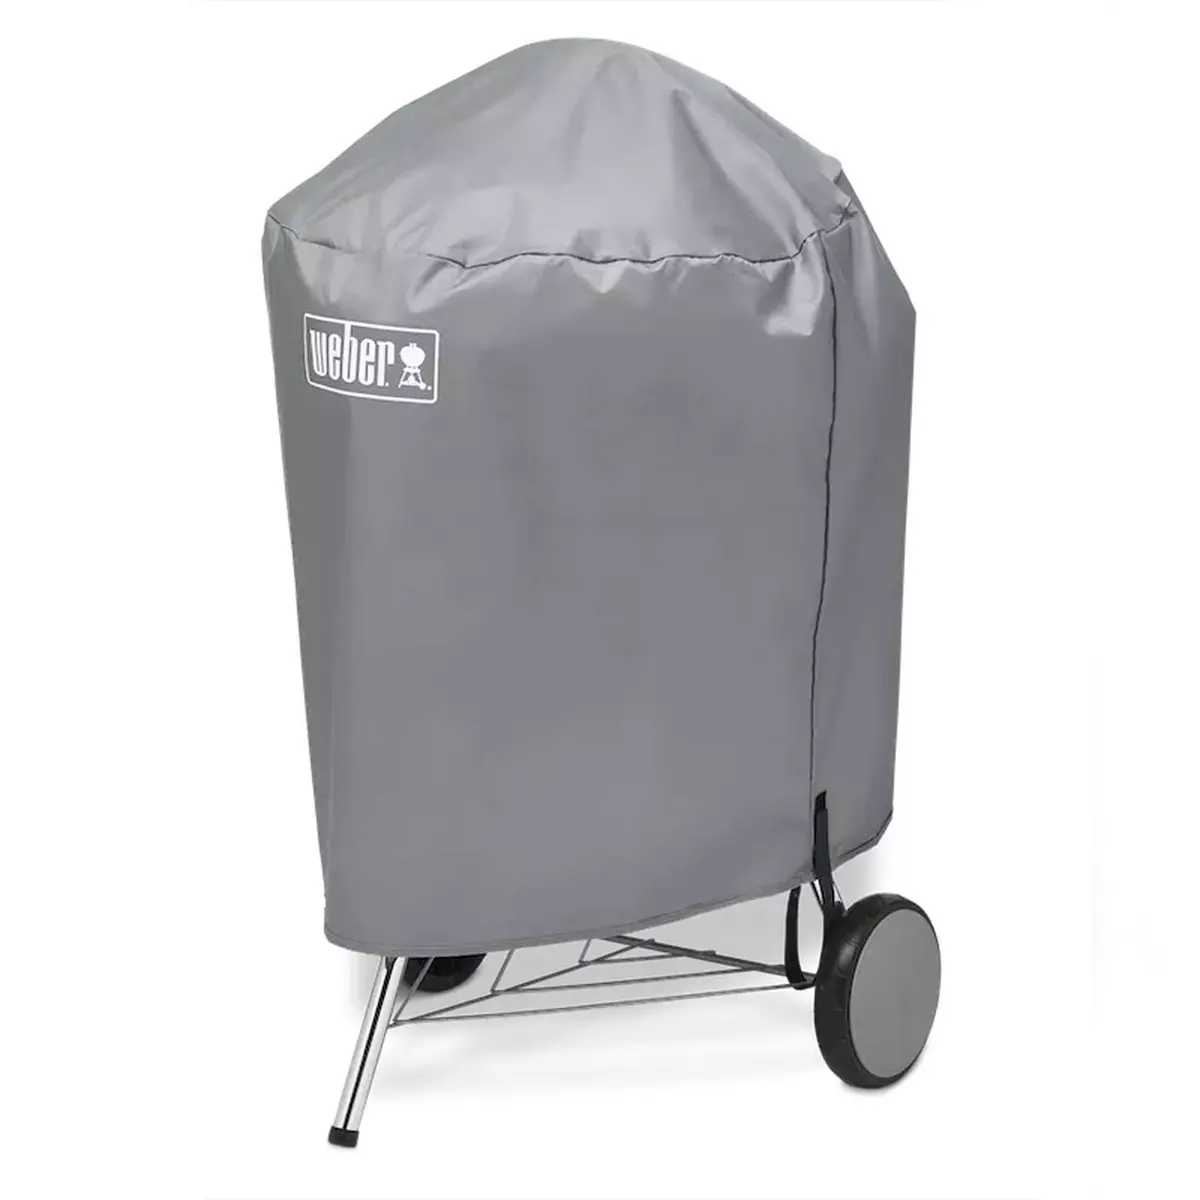 Protective Cover - Weber 57cm Charcoal Grill - Grey